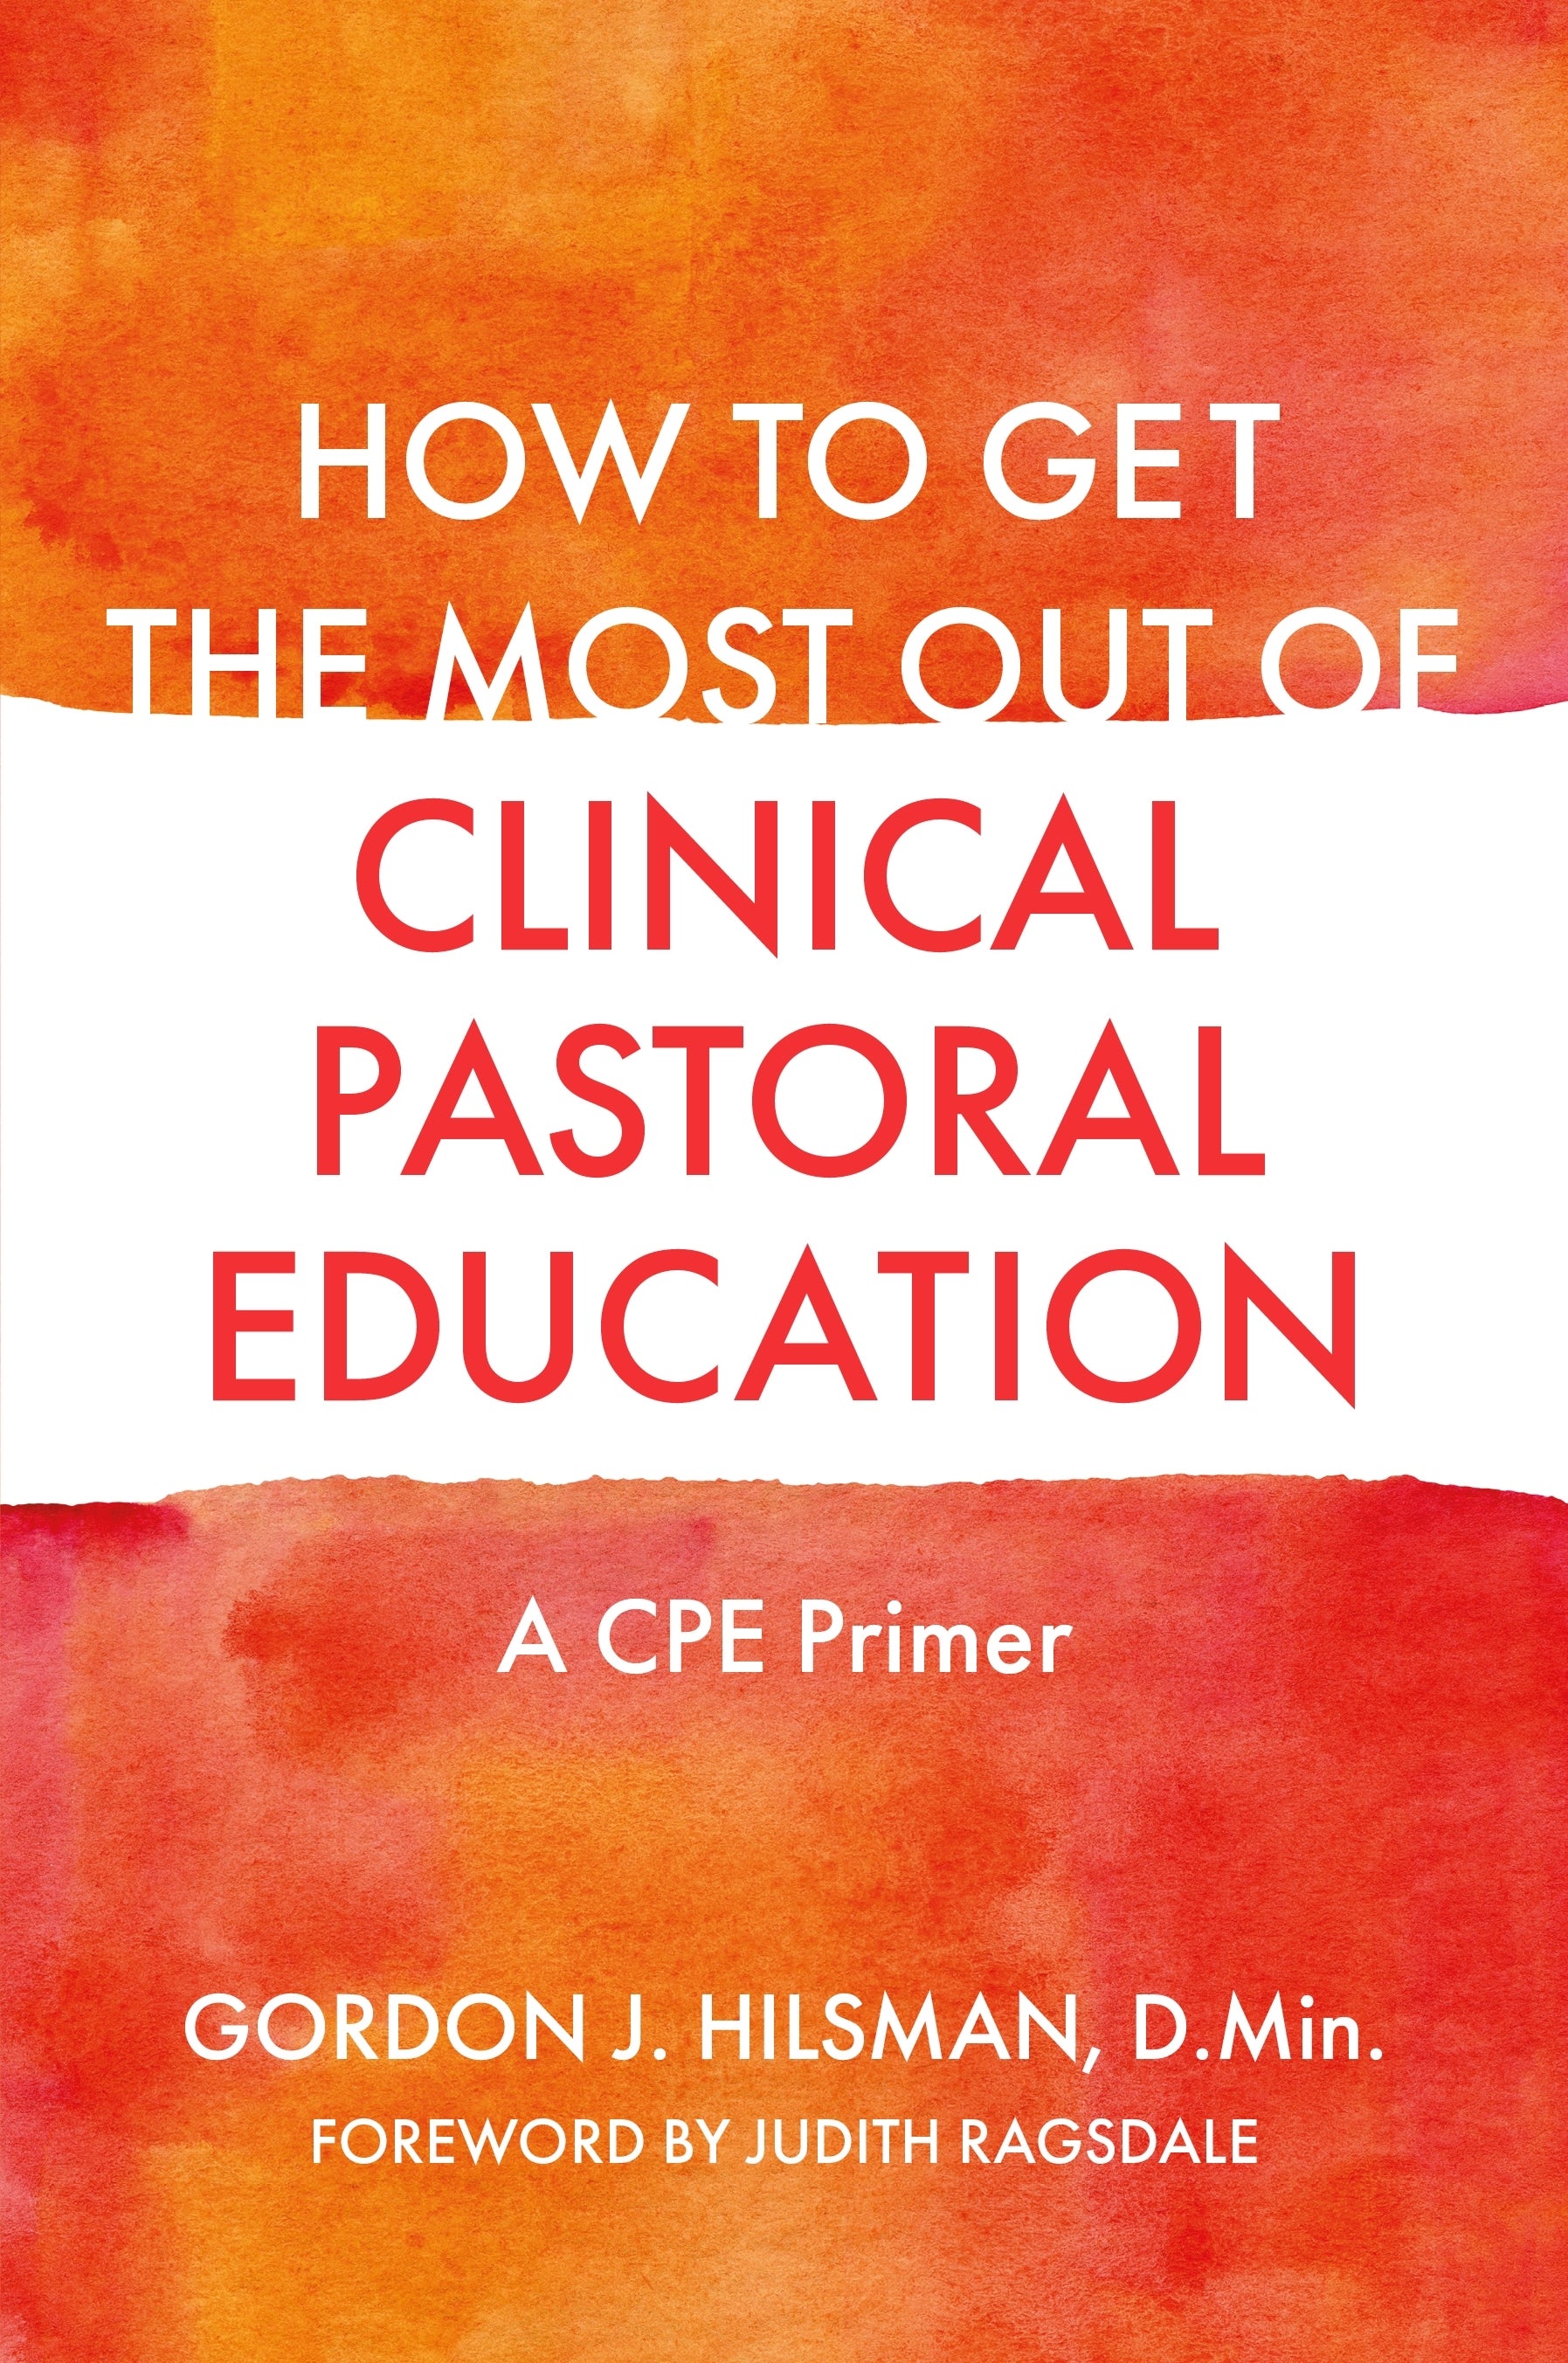 How to Get the Most Out of Clinical Pastoral Education by Judith Ragsdale, Gordon J. Hilsman, D.Min